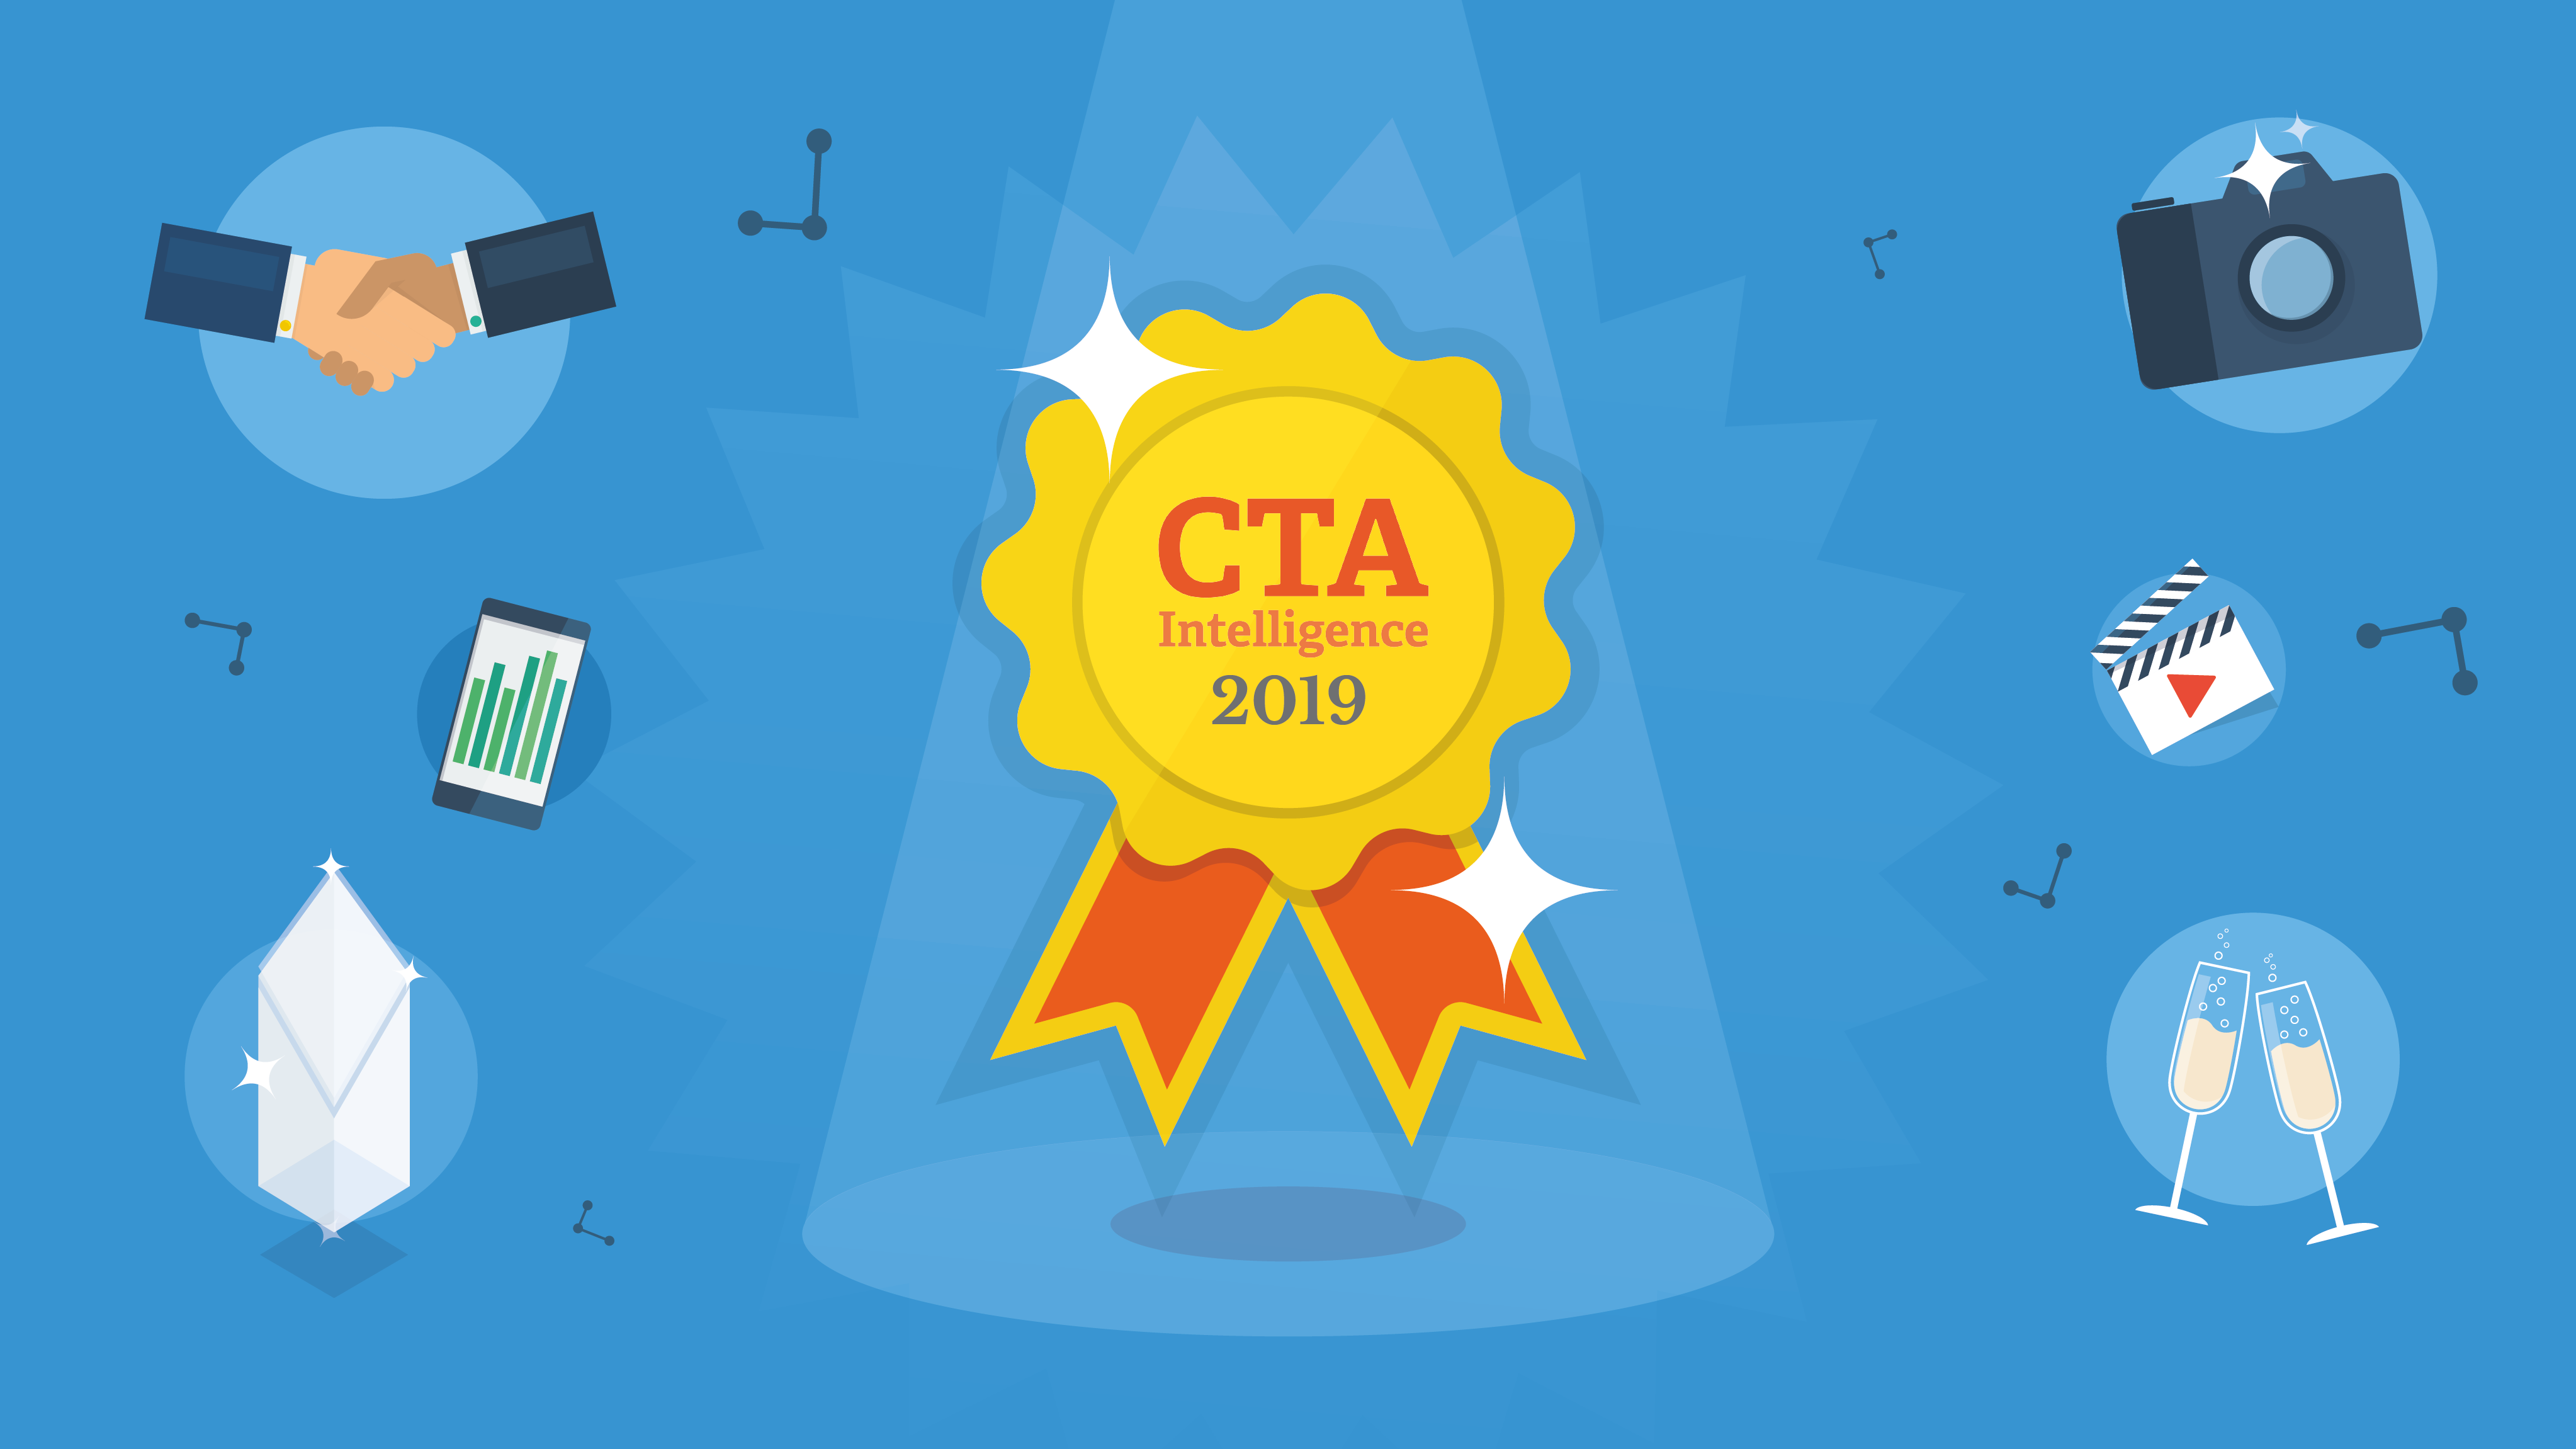 Best Marketing and Communications Consultancy Agency at CTA Intelligence US Services Awards 2019